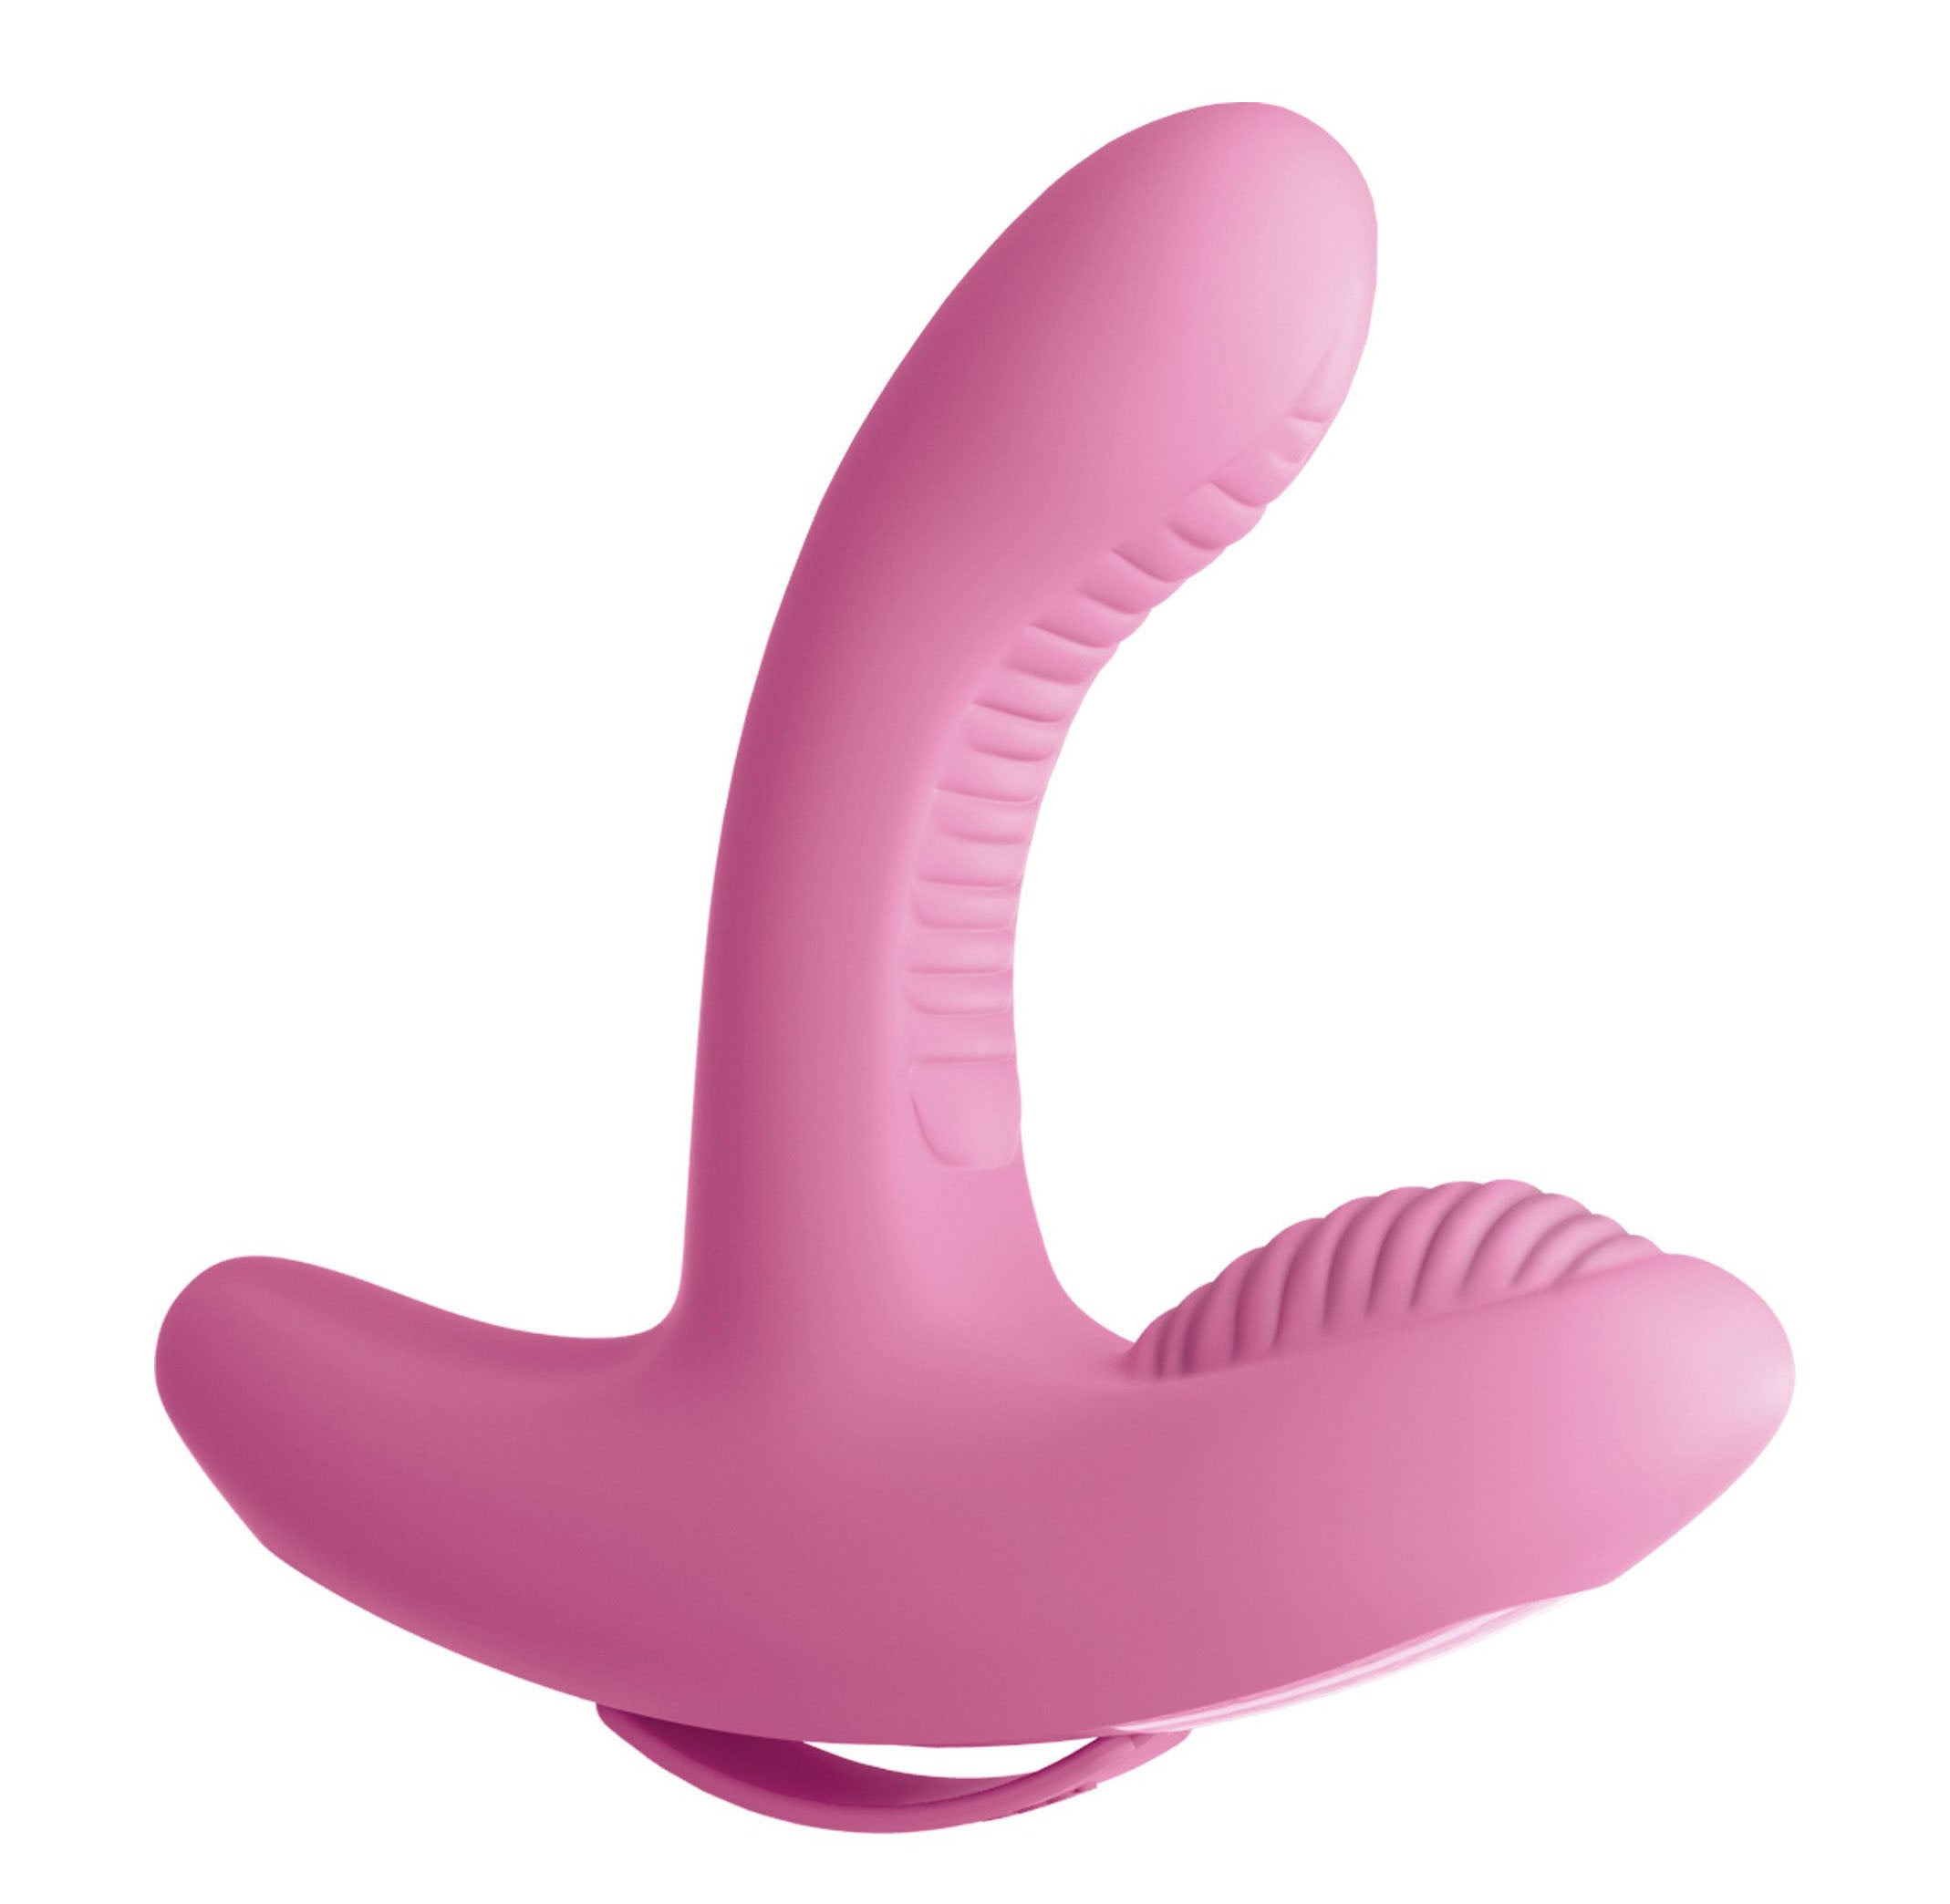 3Some Rock N Grind Vibe > Sex Toys For Ladies > G-Spot Vibrators 6.8 Inches, Female, G-Spot Vibrators, NEWLY-IMPORTED, Silicone - So Luxe Lingerie